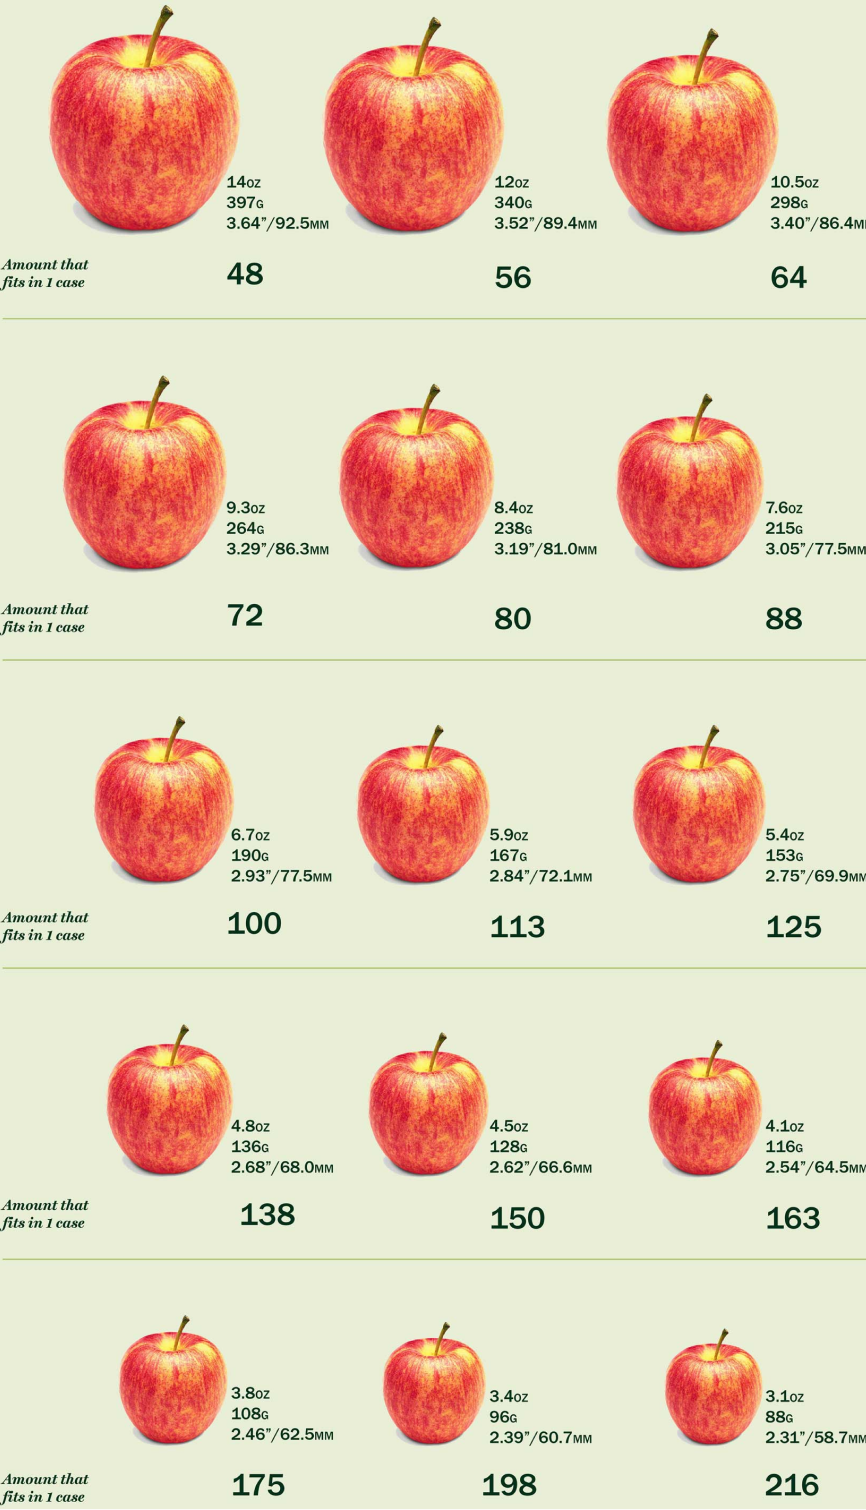 A diagram showing the 15 standard sizes of apples from 216 to 48.